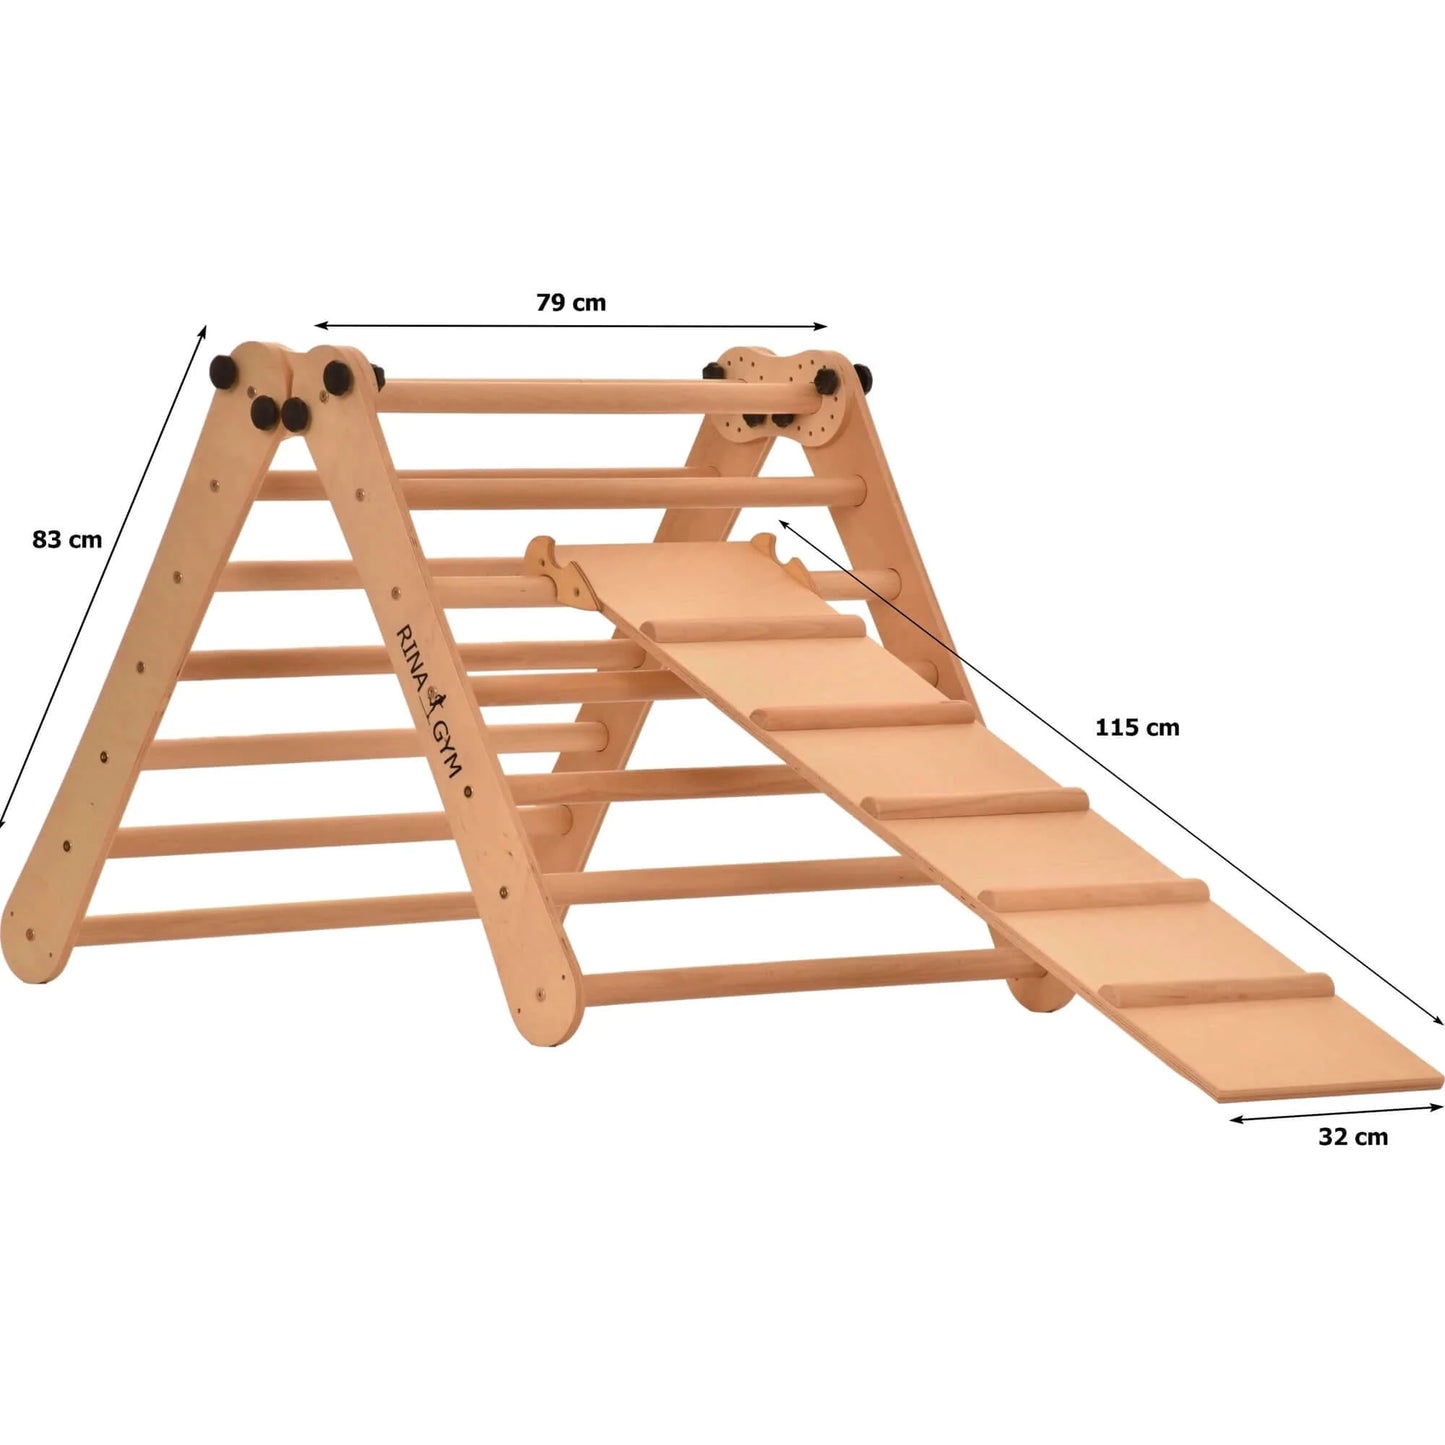 Climbing triangle with chicken ladder, natural wood, various sizes